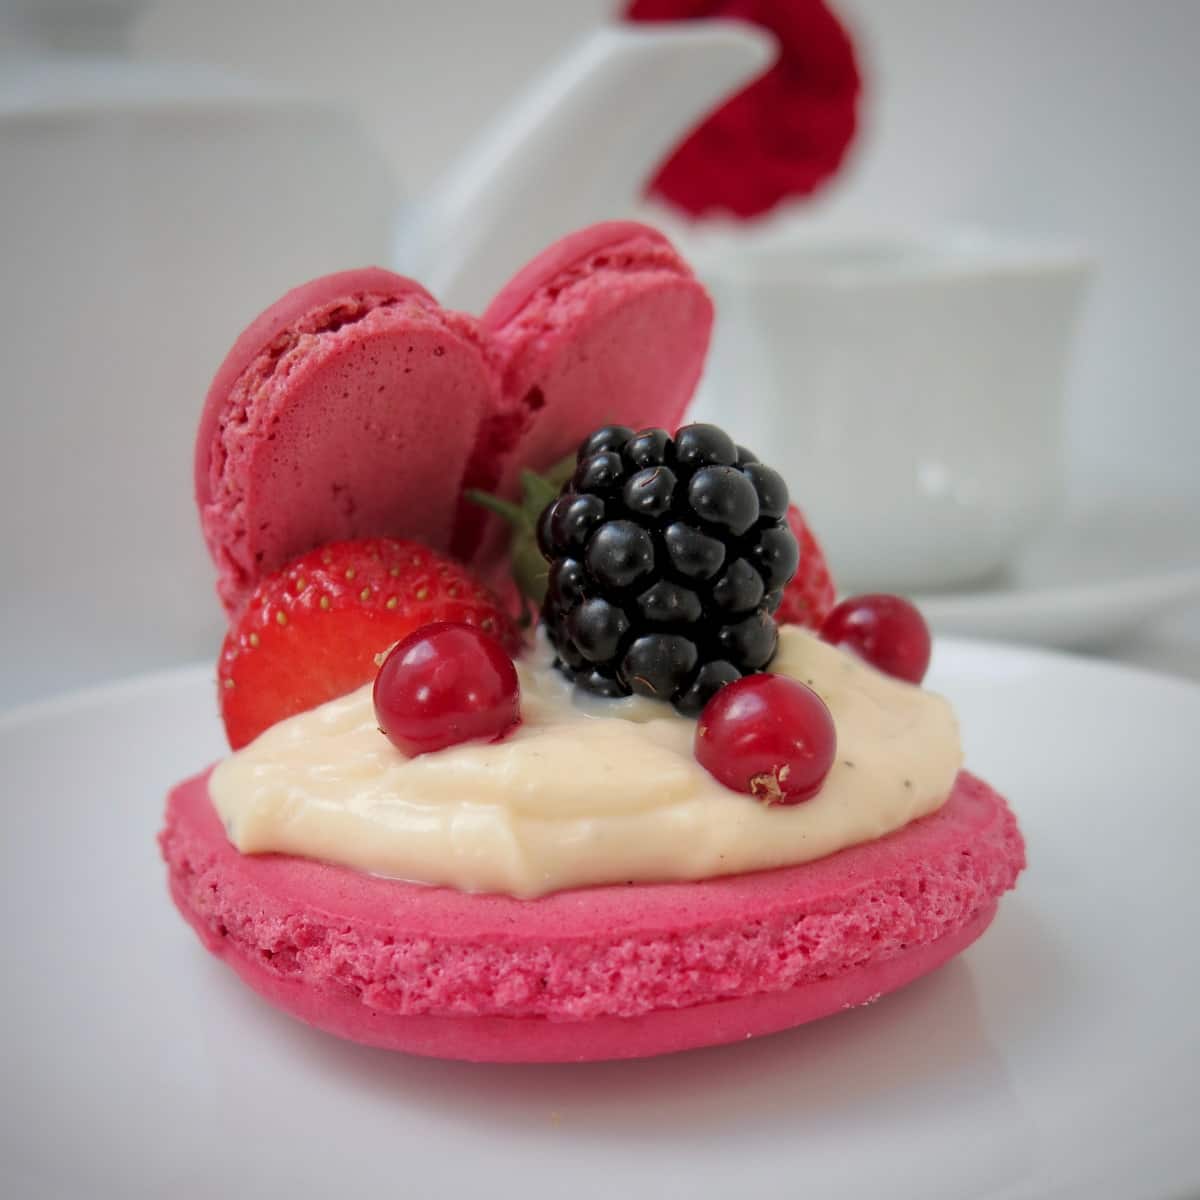 giant macaron open like an oyster shell with berries